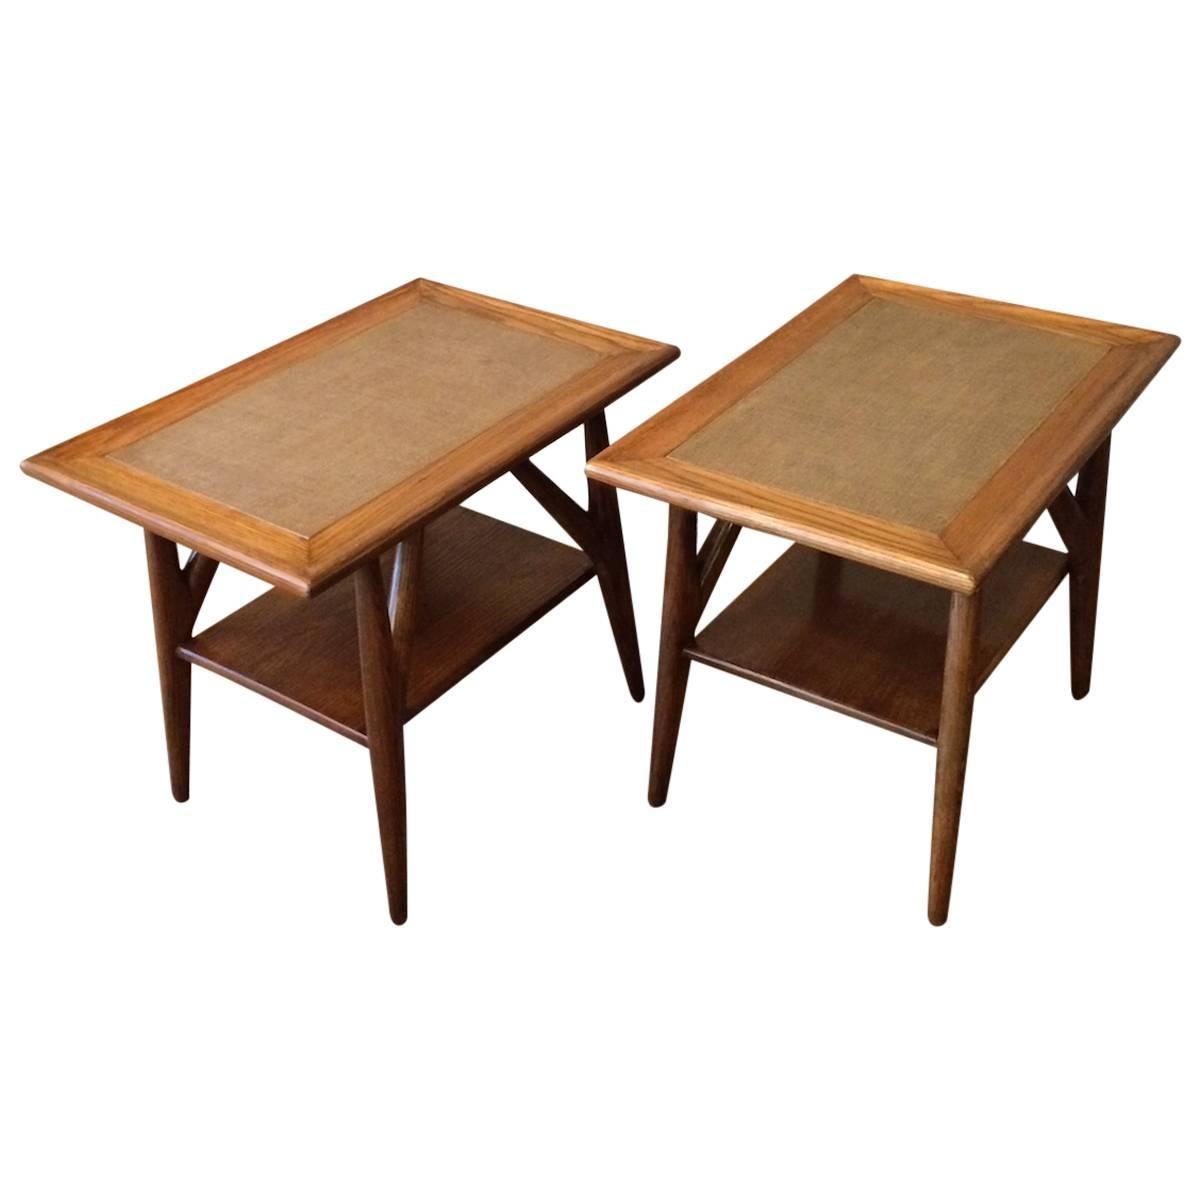 Pair of Oak End Tables Attributed to Paul Laszlo